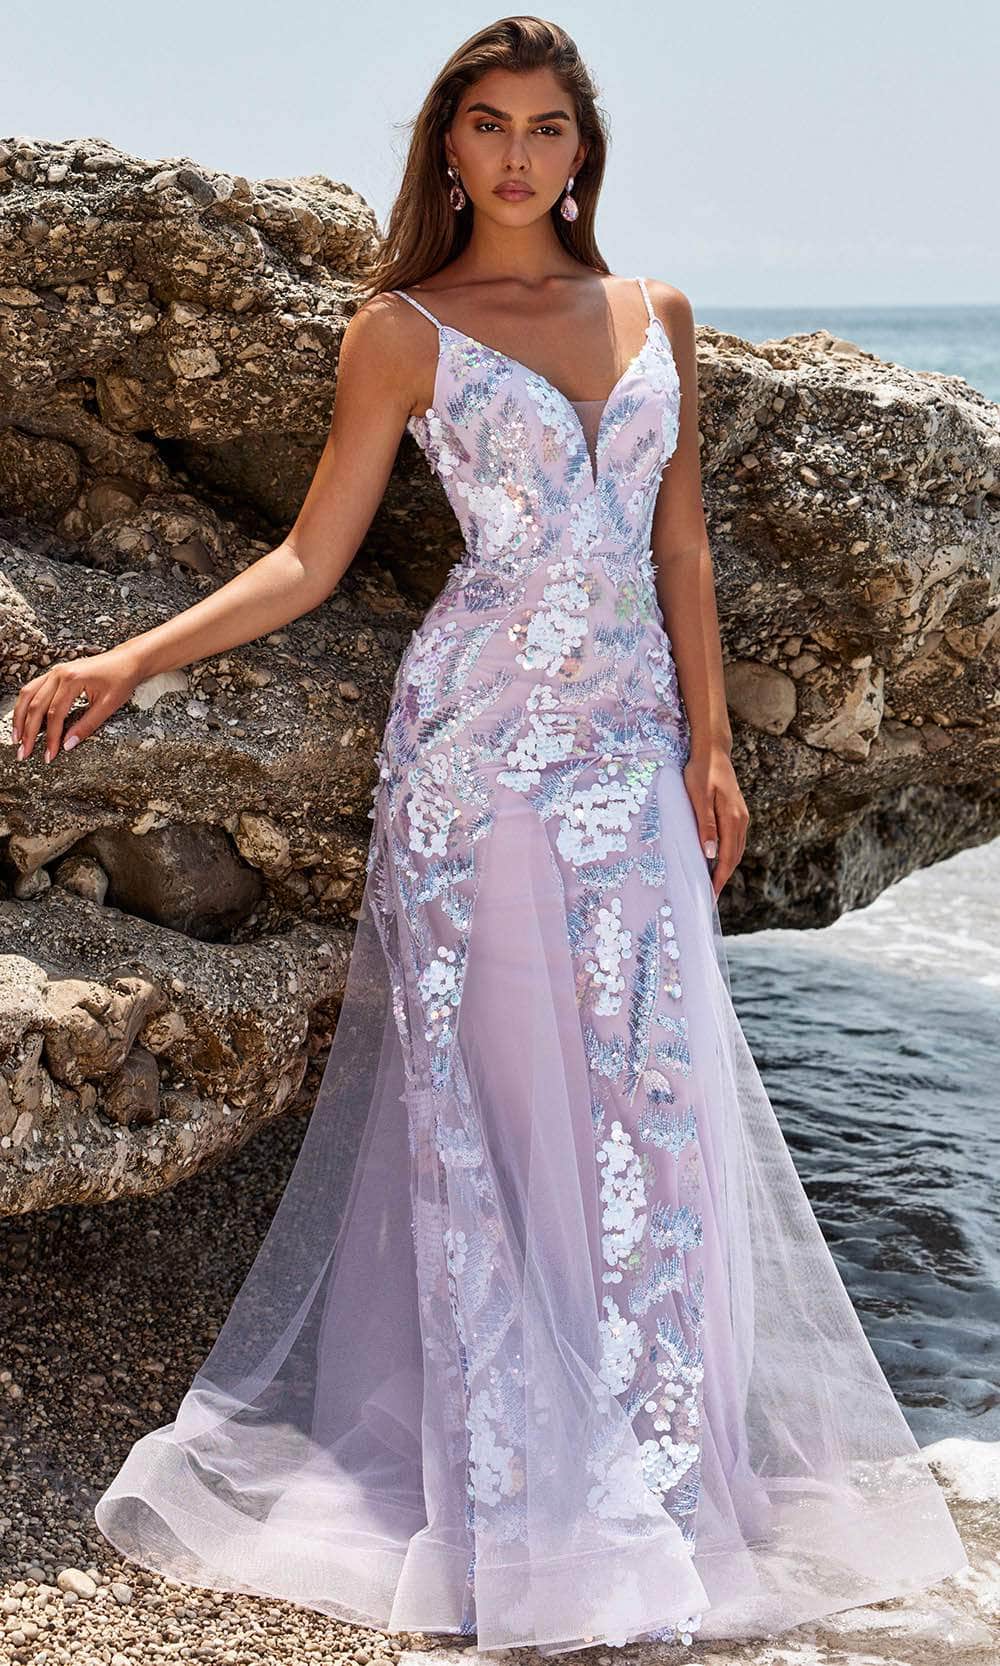 Blush by Alexia Designs 12113 - Plunging V-Neck Godets Prom Gown
